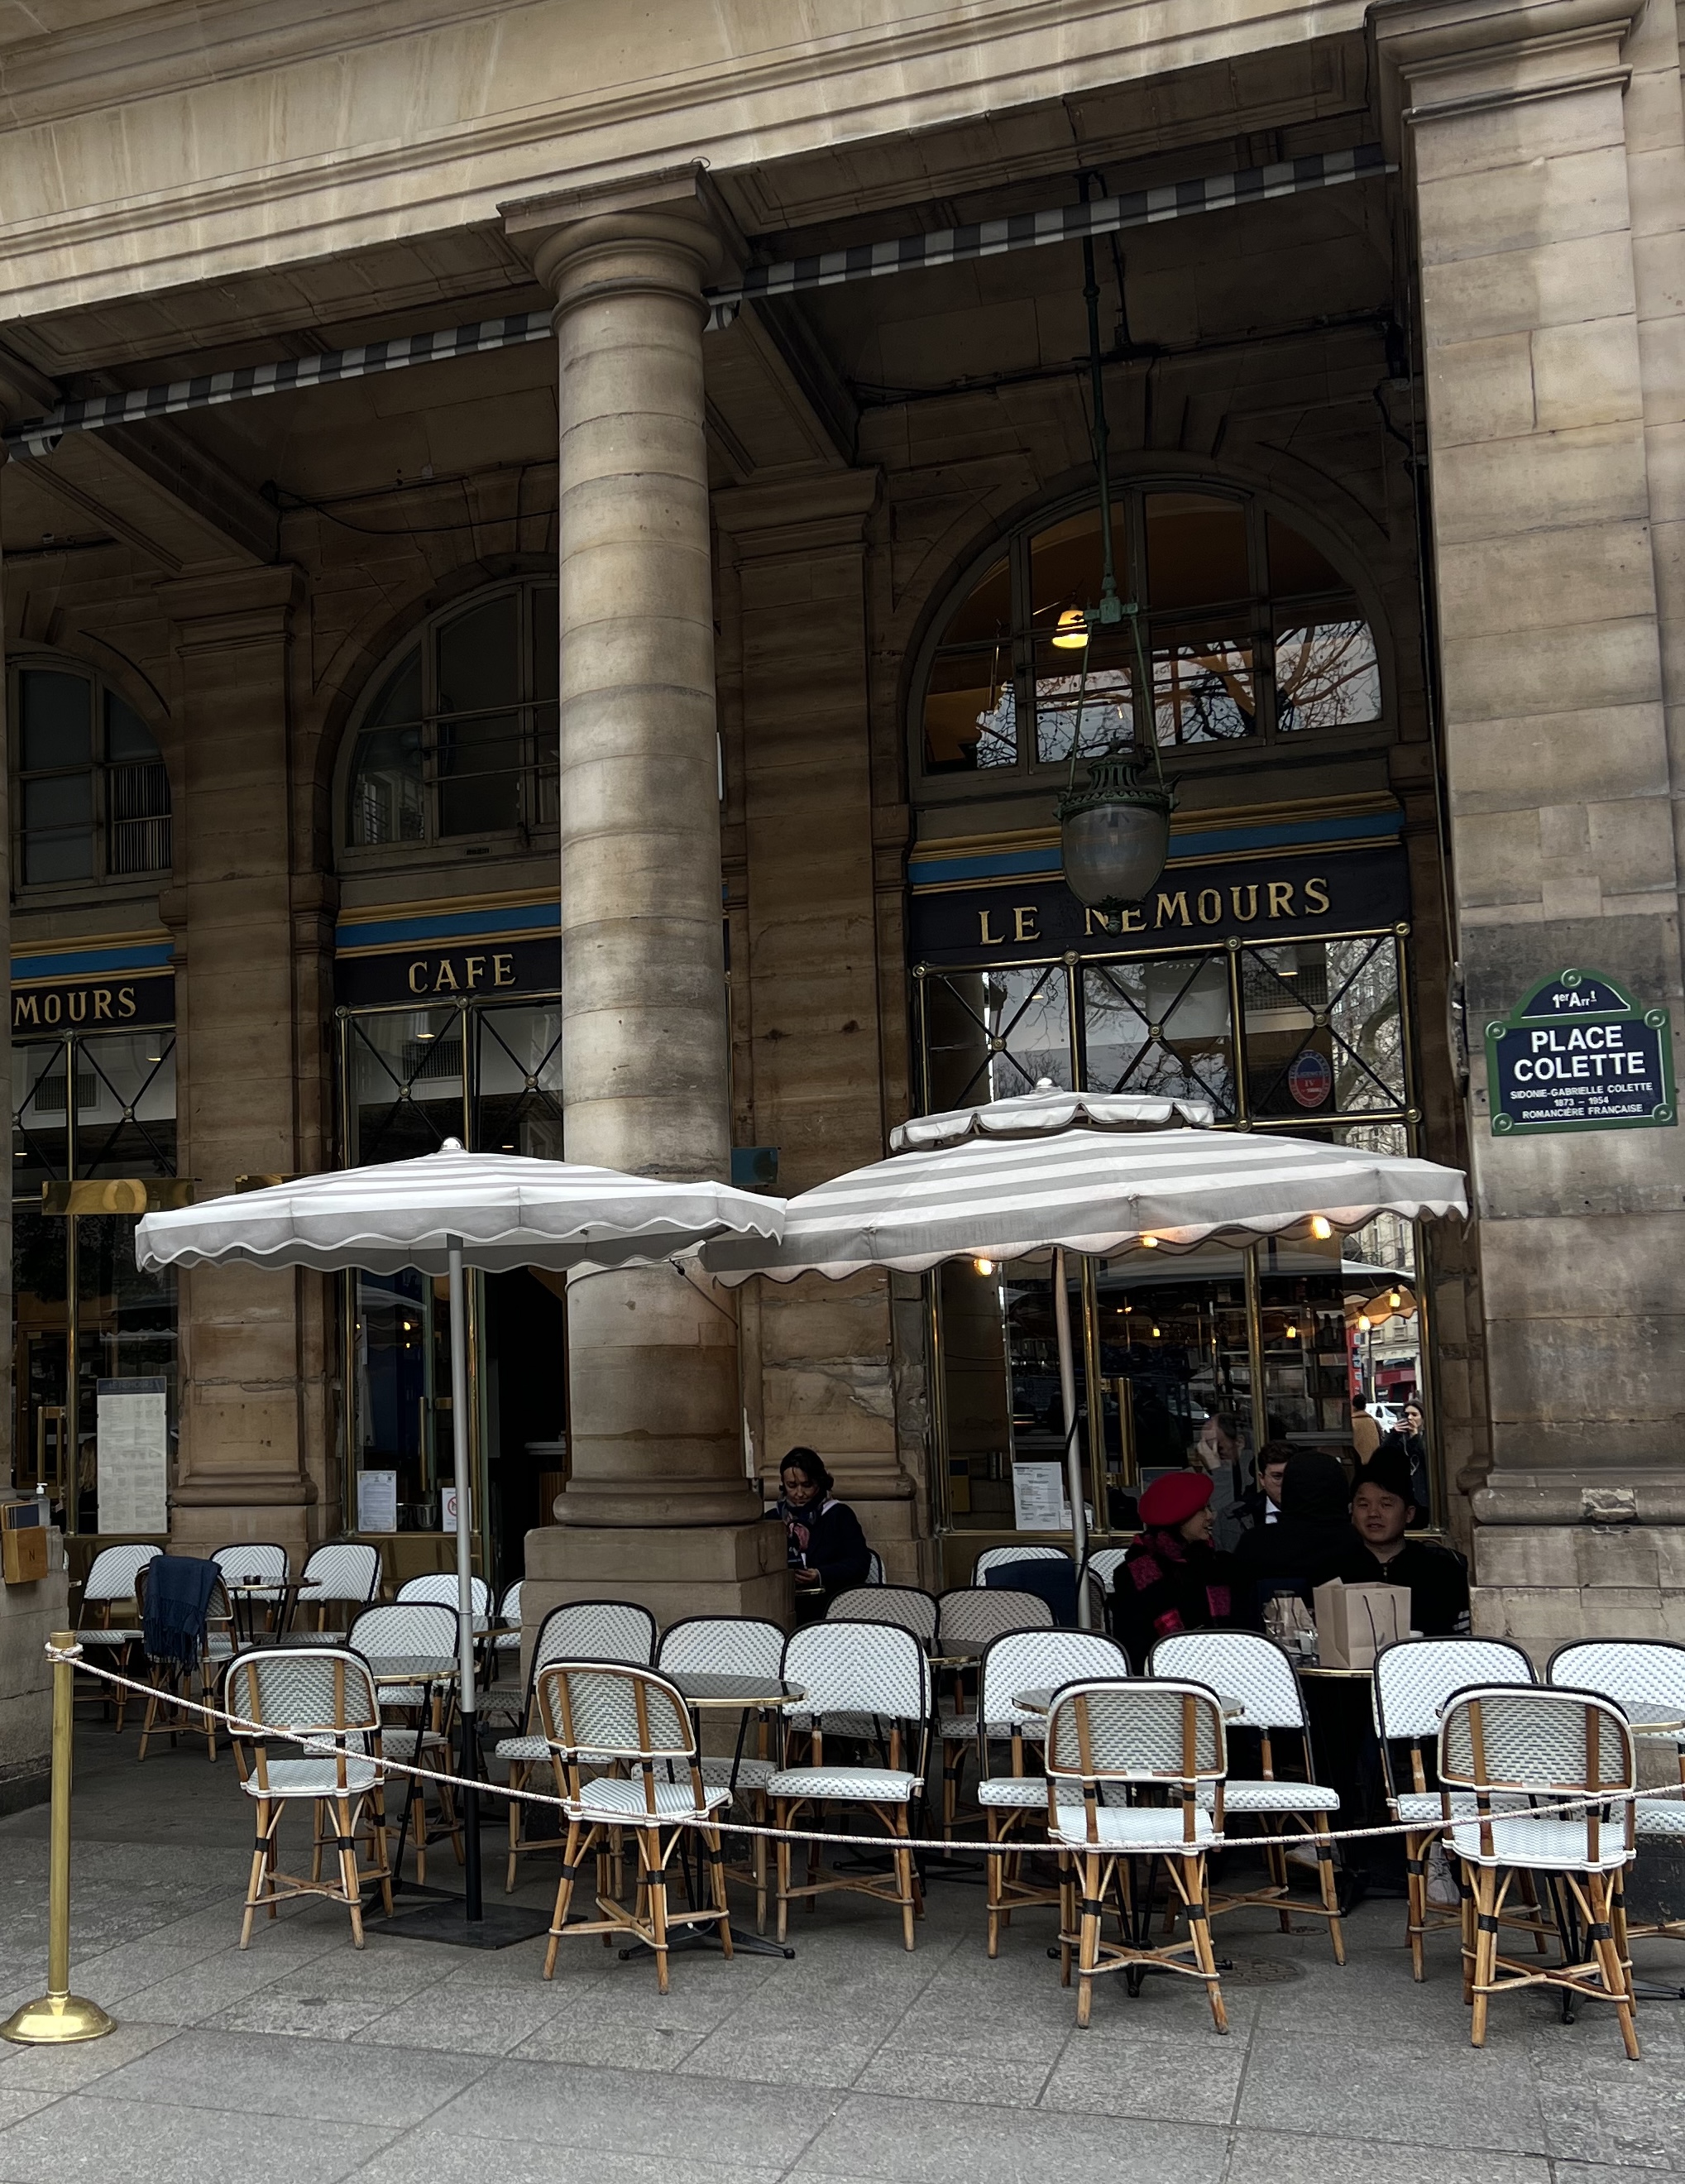 Le Nemours cafe - another must on the list of the prettiest cafes in Paris 